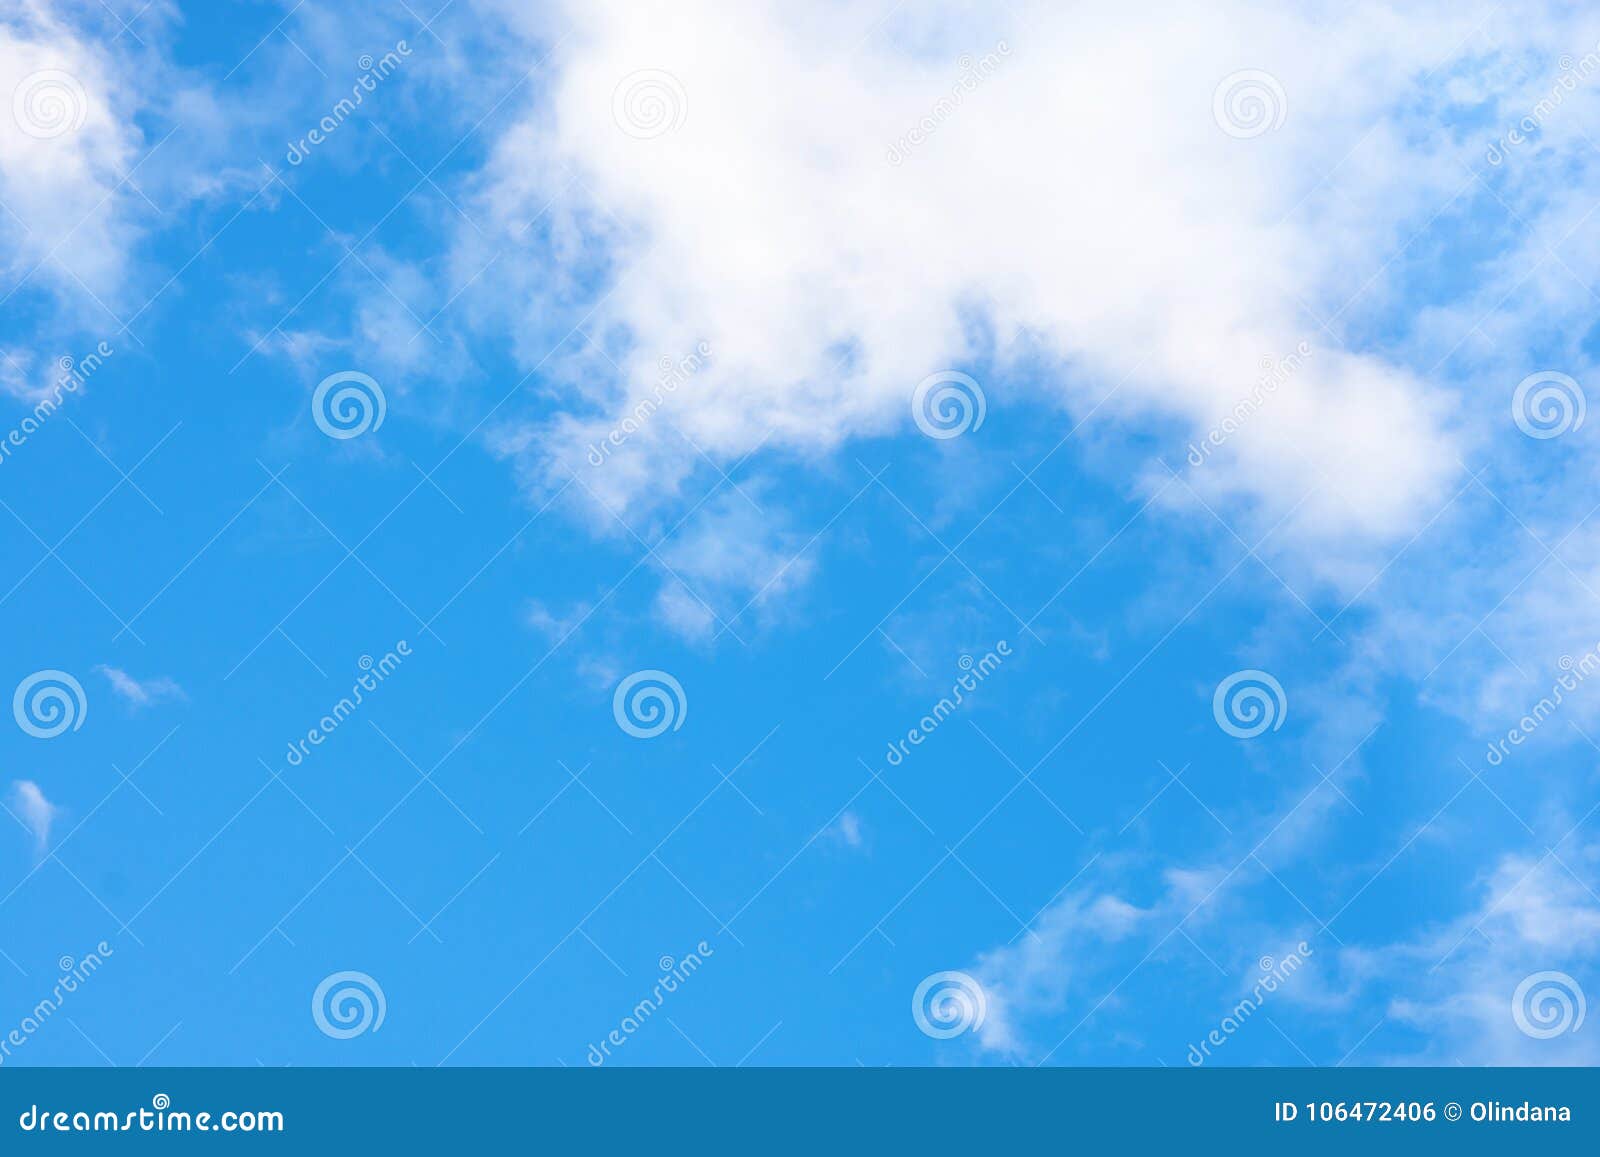 Clear Blue Sky with Small Fluffy Transparent White Clouds in the Corner ...